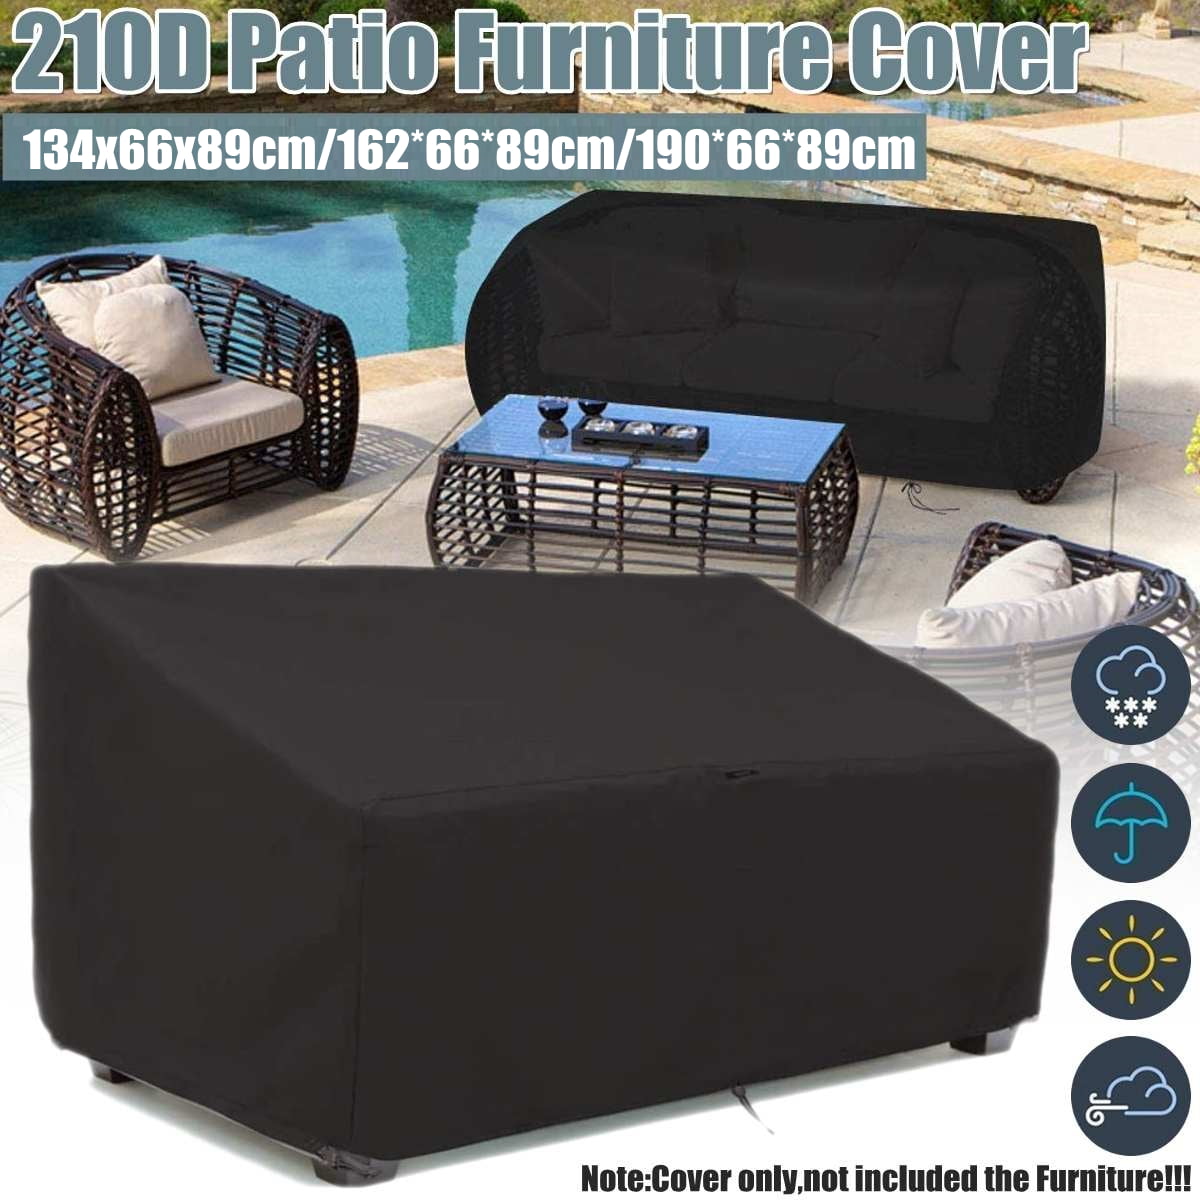 Extra Large Garden Rattan Outdoor Furniture Cover Patio Table Protection UKSTOCK 